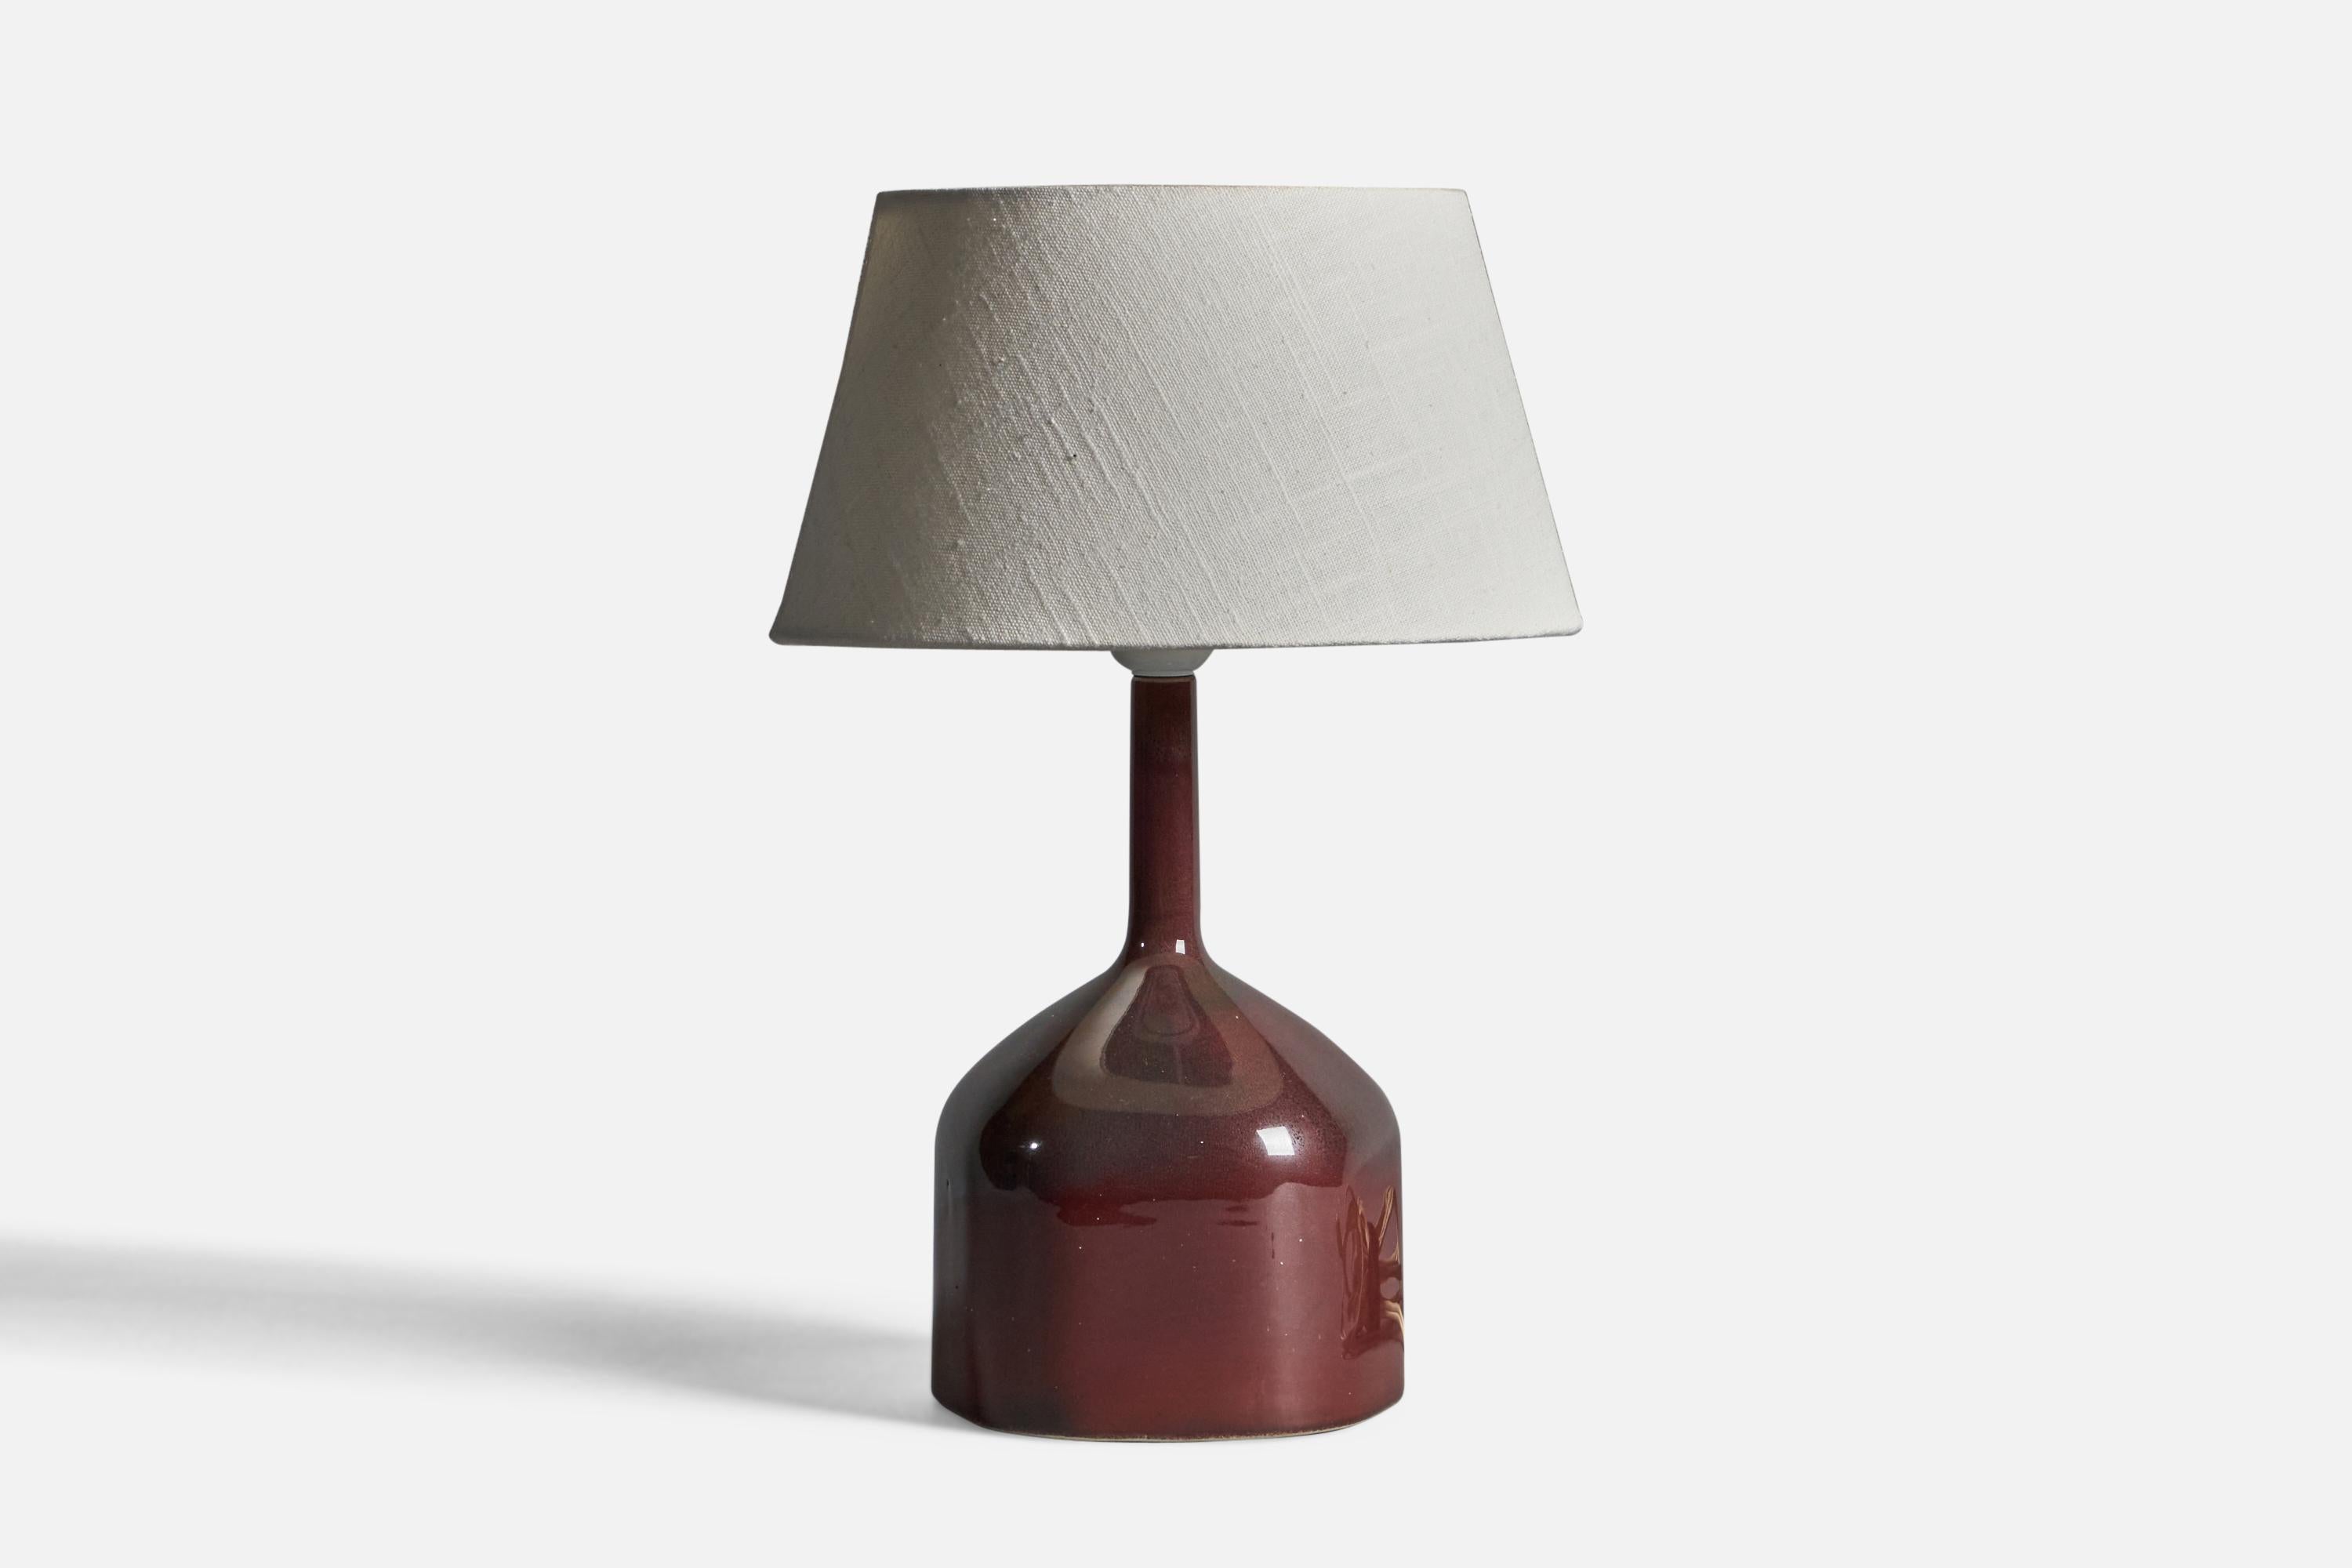 A brown-glazed stoneware and fabric table lamp, designed by Karin Björquist and produced by Gustavsbergs, Sweden, 1960s.

Overall Dimensions (inches): 15.25